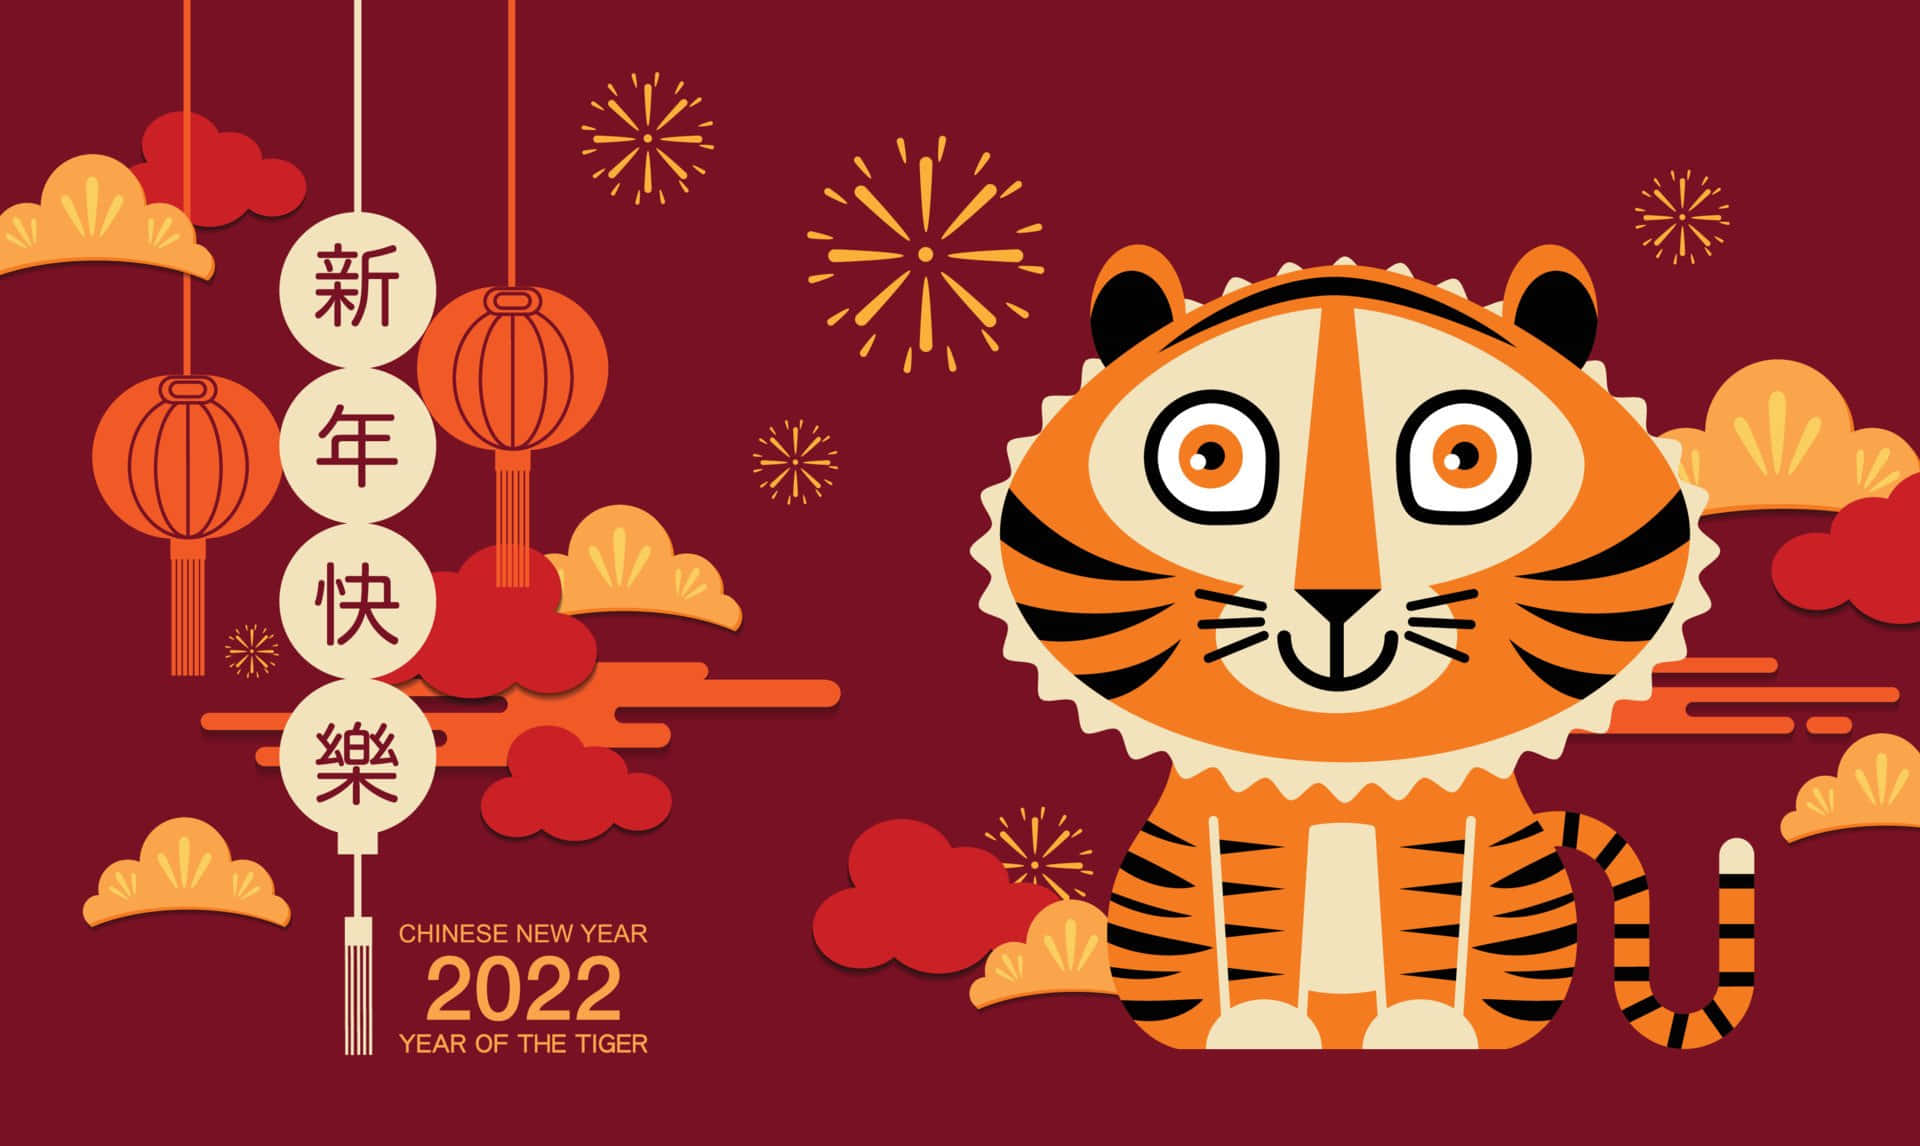 Celebrate with Family this Chinese New Year 2022!